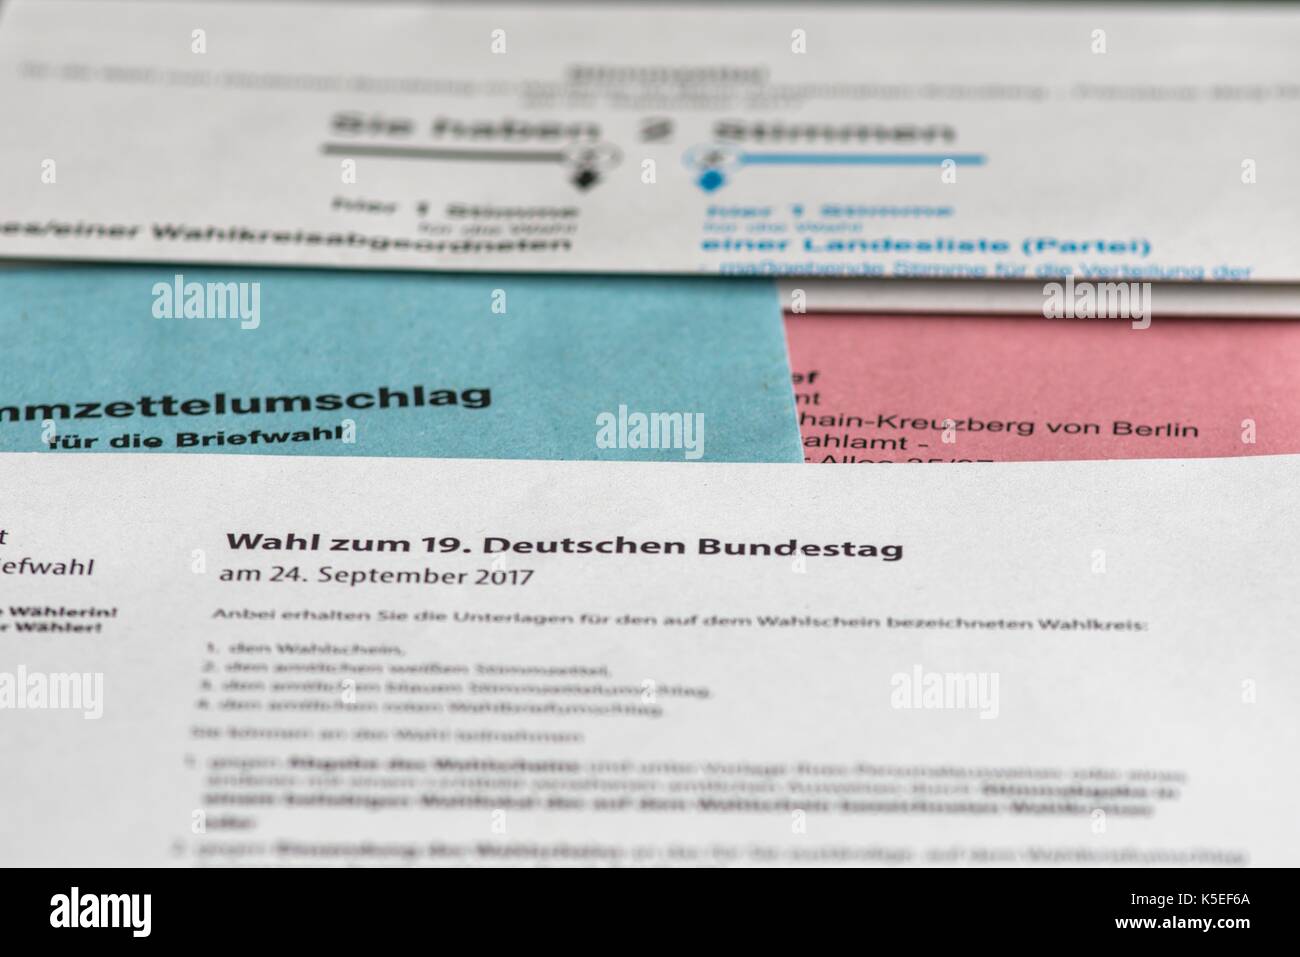 Polling card or absentee ballot or election documents for the german federal election 2017 in Germany, Europe Stock Photo